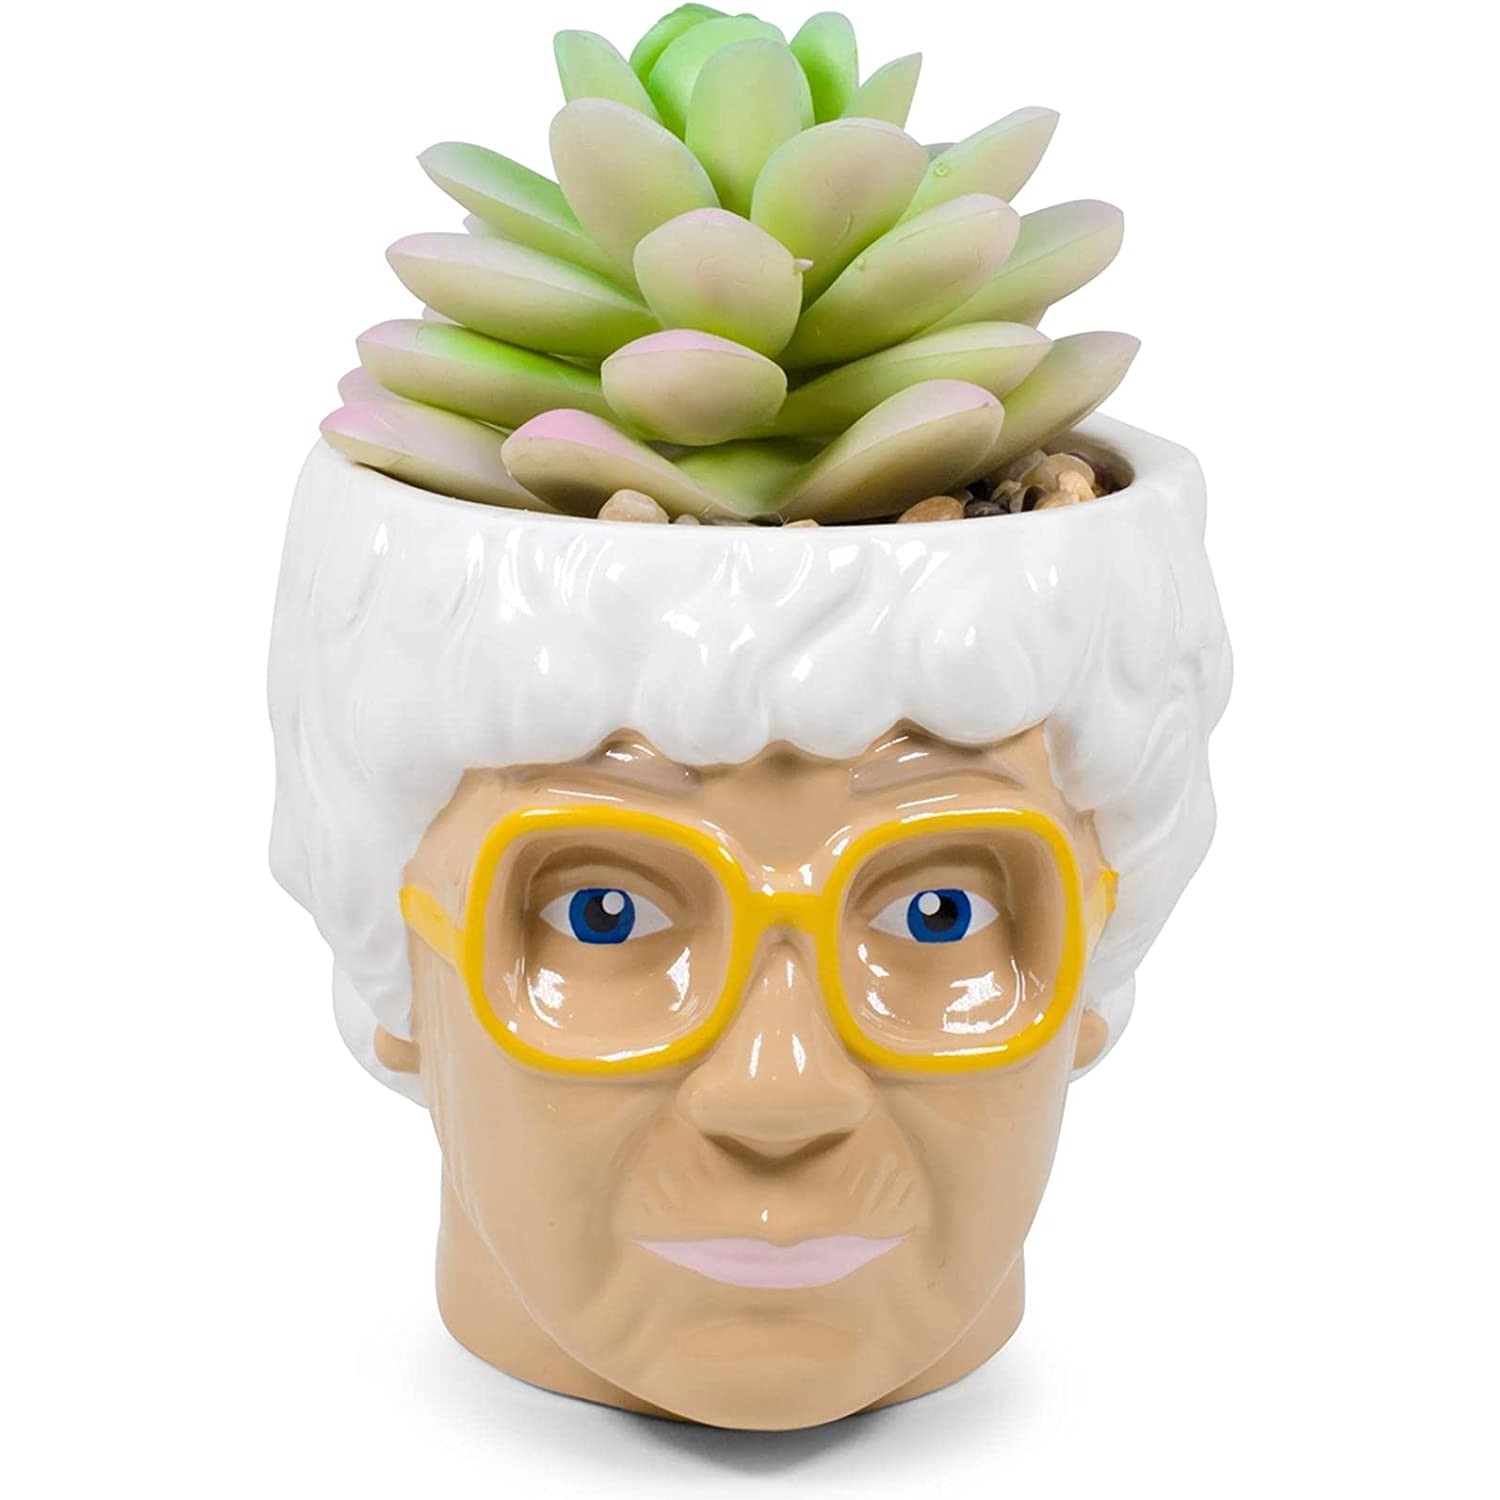 A mini Ceramic Planter with Faux Succulent. The planter is in the shape of Sophia's head from The Golden Girls.